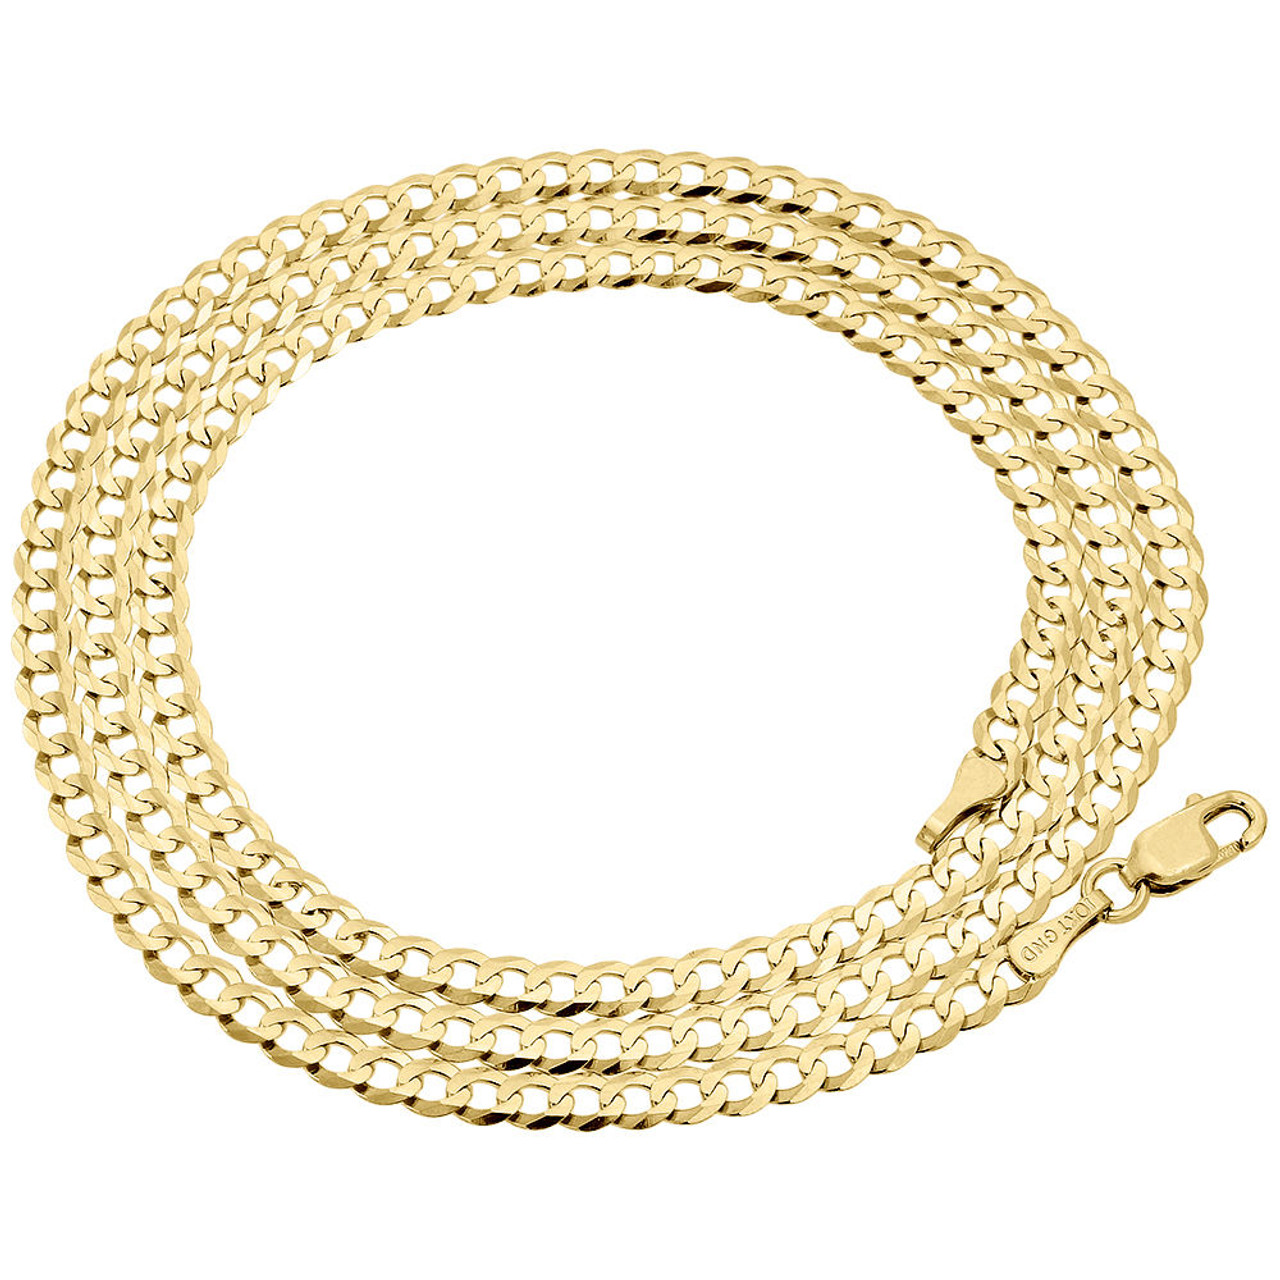 Real 10K Yellow Gold 3.0 mm Solid Plain Cuban Link Style Chain Necklace 16-28"